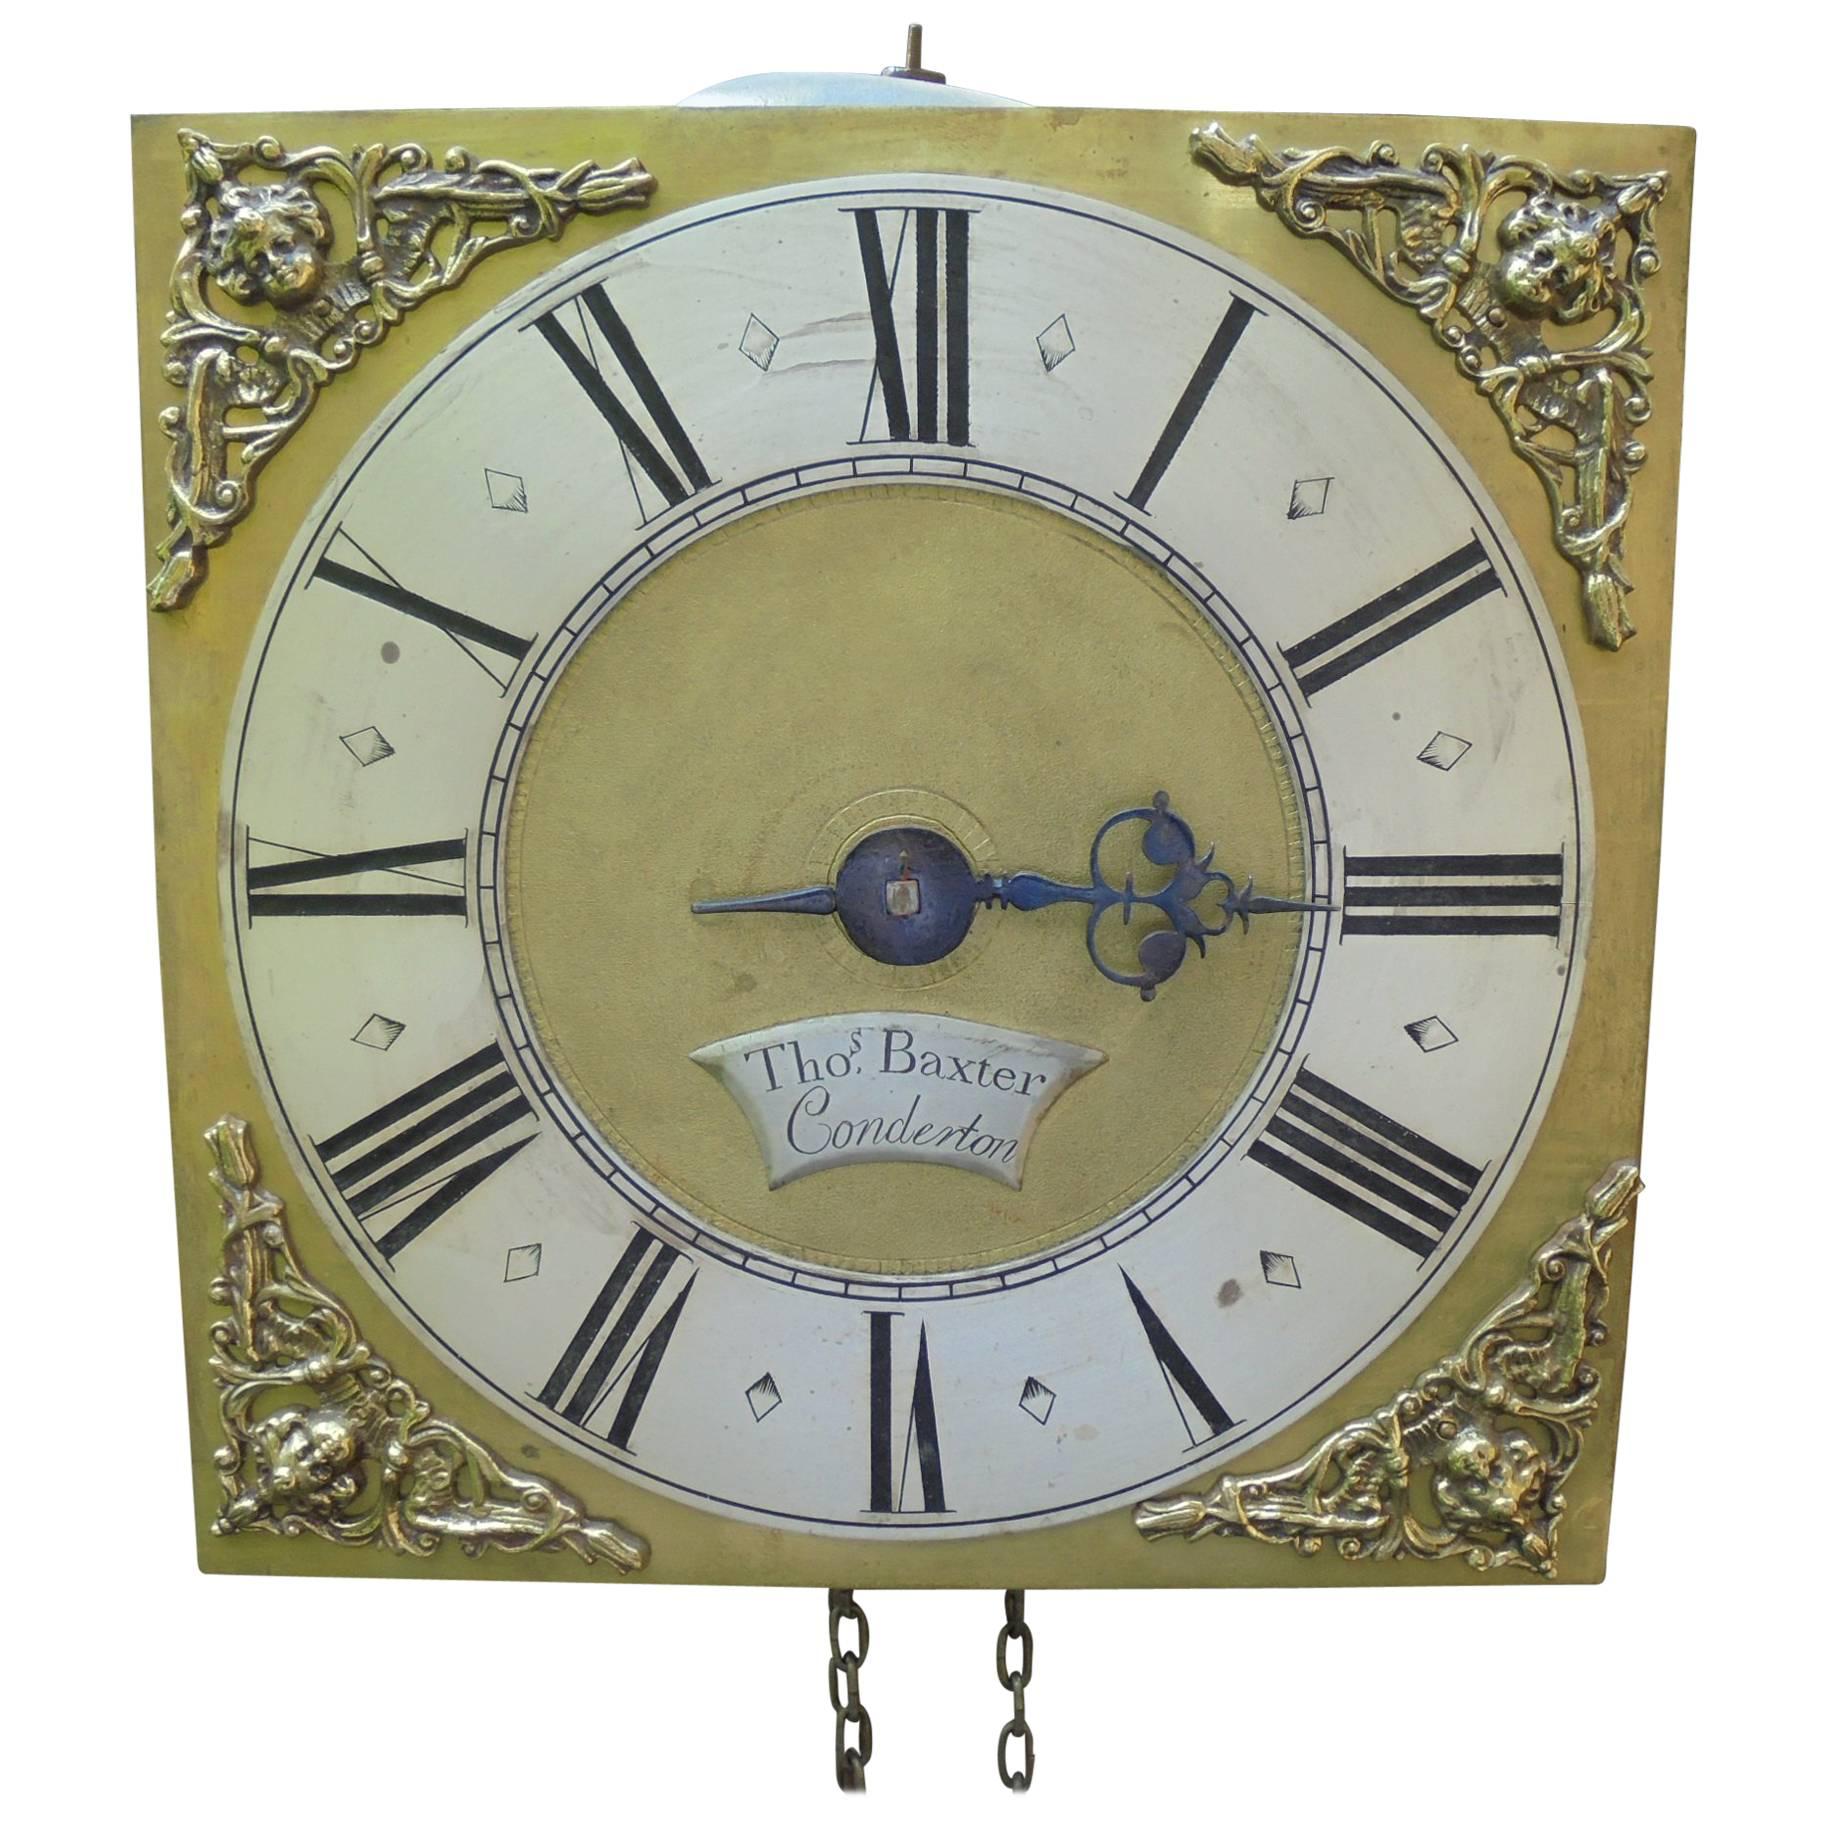 Antique Hook and Spike Wall Clock Thomas Baxter Condereton For Sale